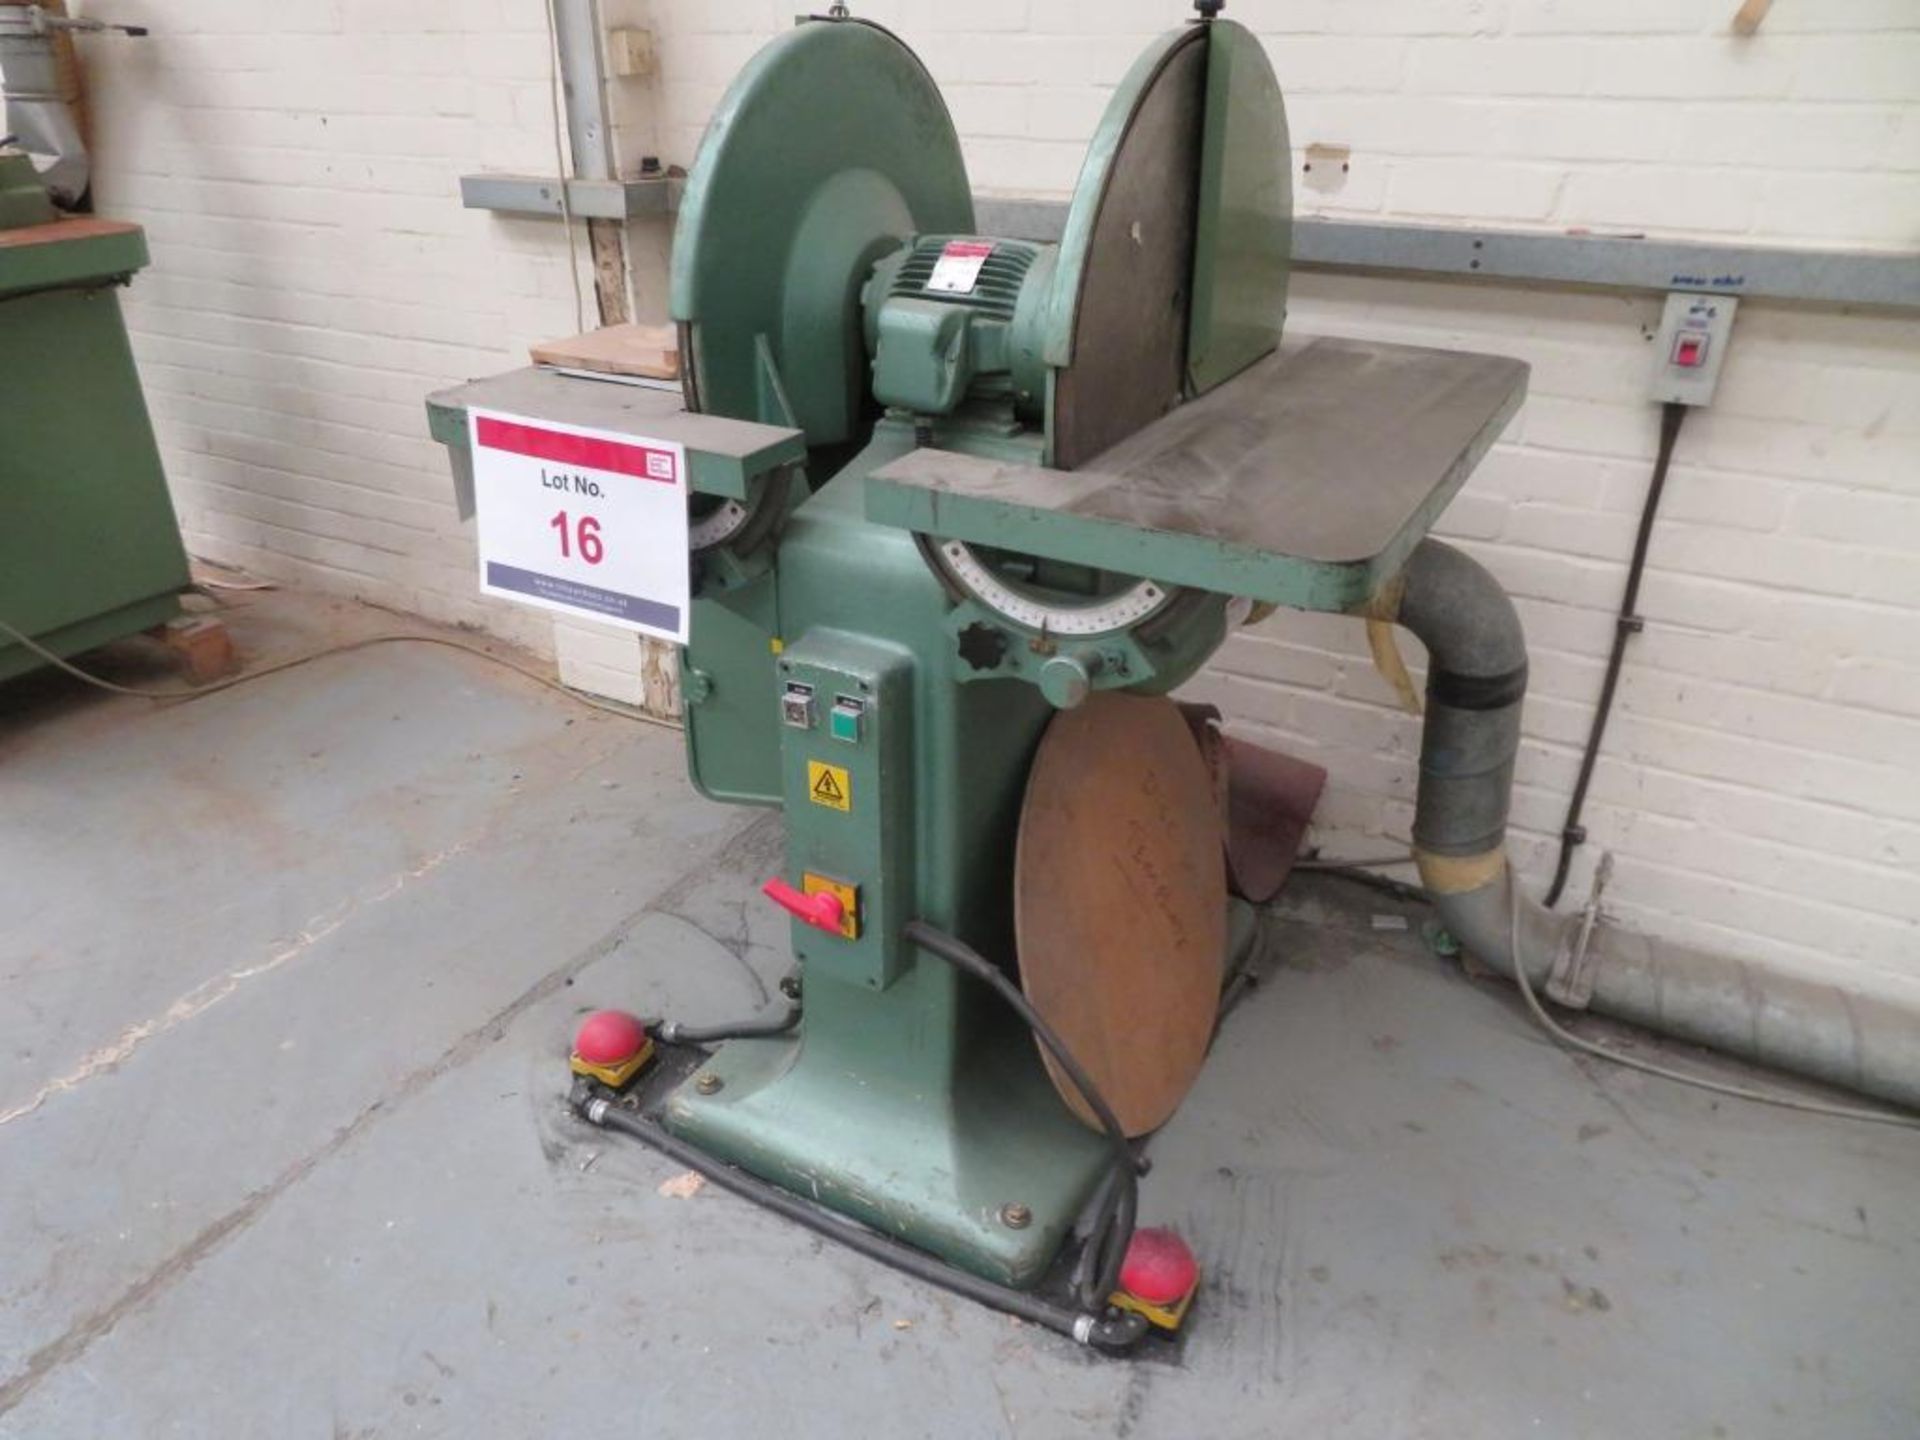 Phillipson BP vertical disk sander. NB. A work Method Statement and Risk Assessment must be provided